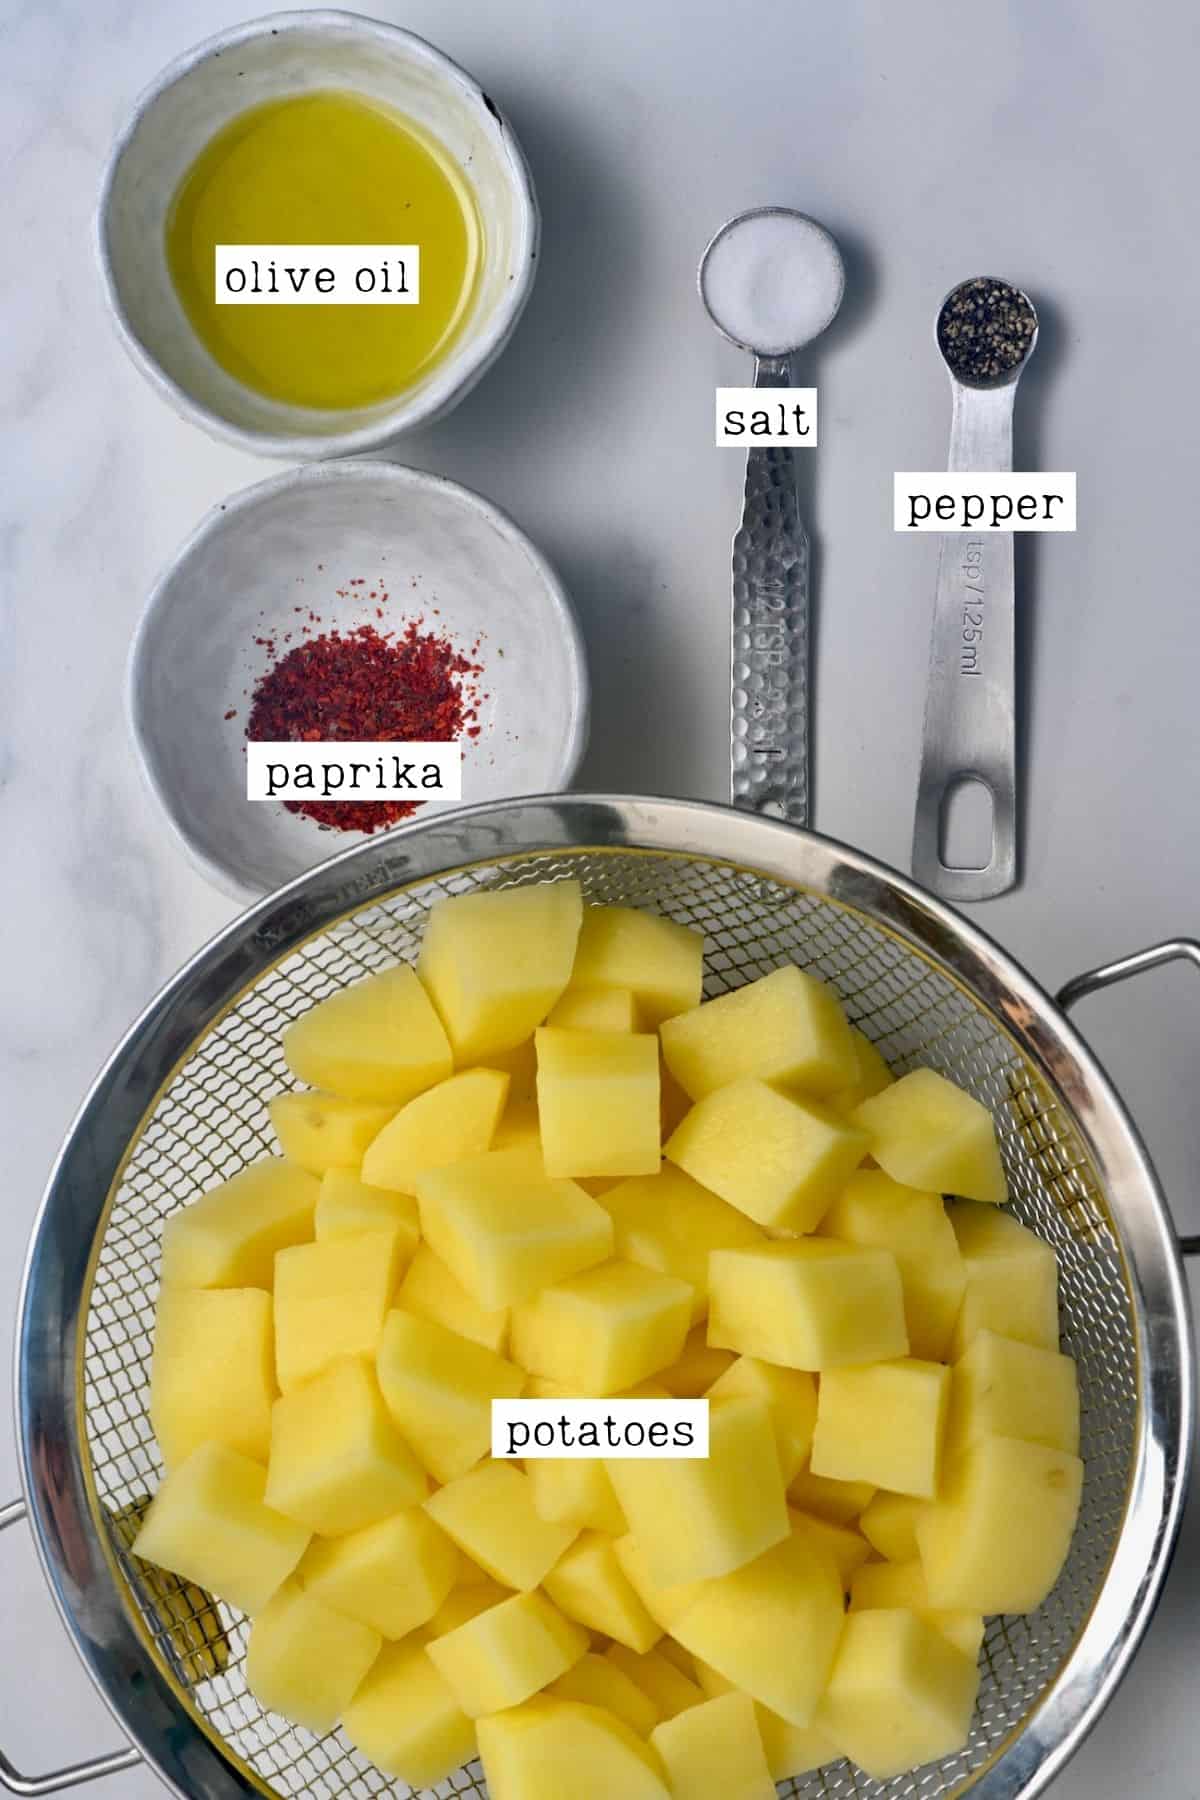 Ingredients for home fries